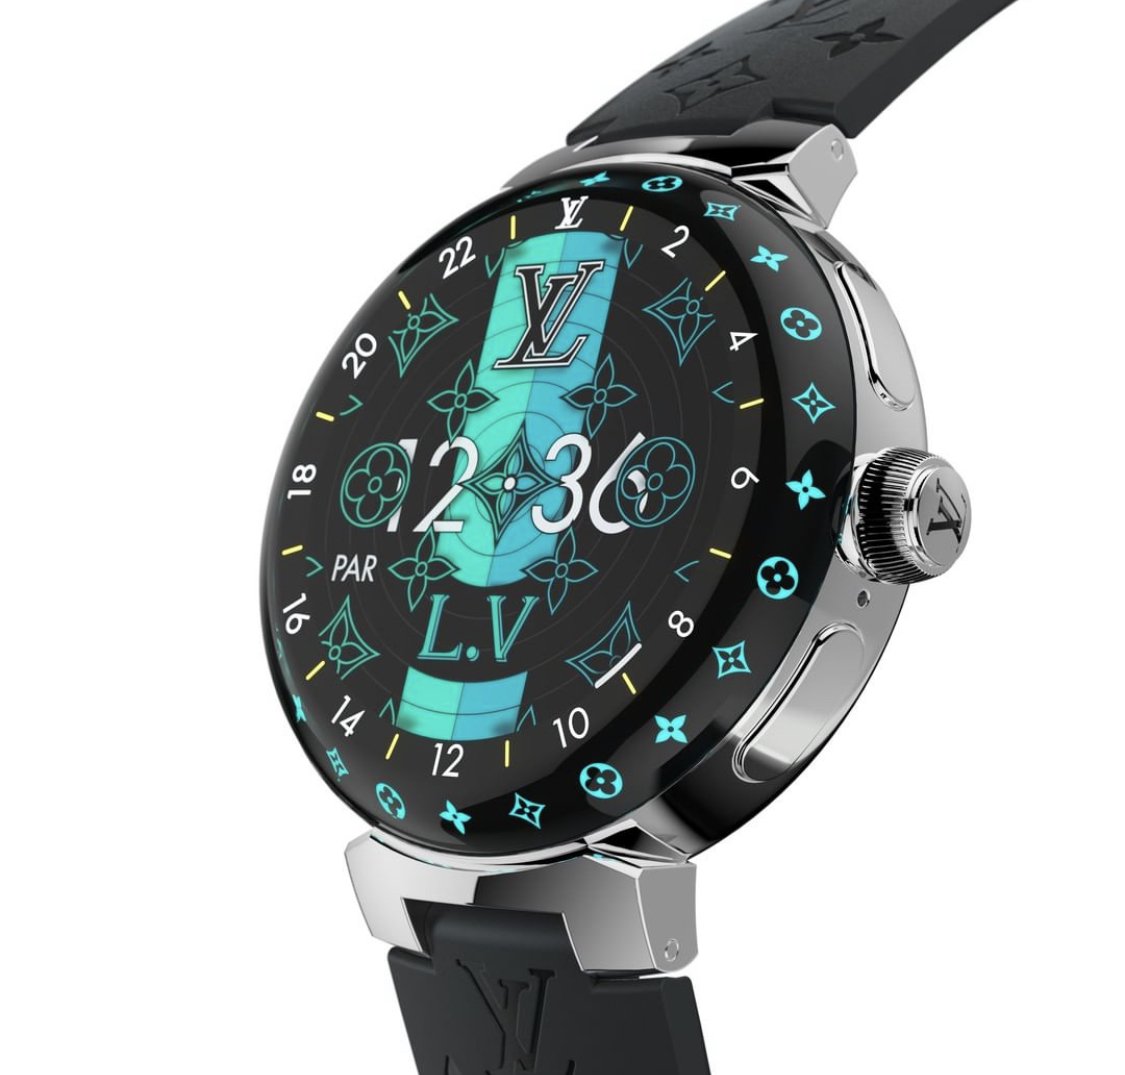 Louis Vuitton unveils new Tambour Horizon connected watch and